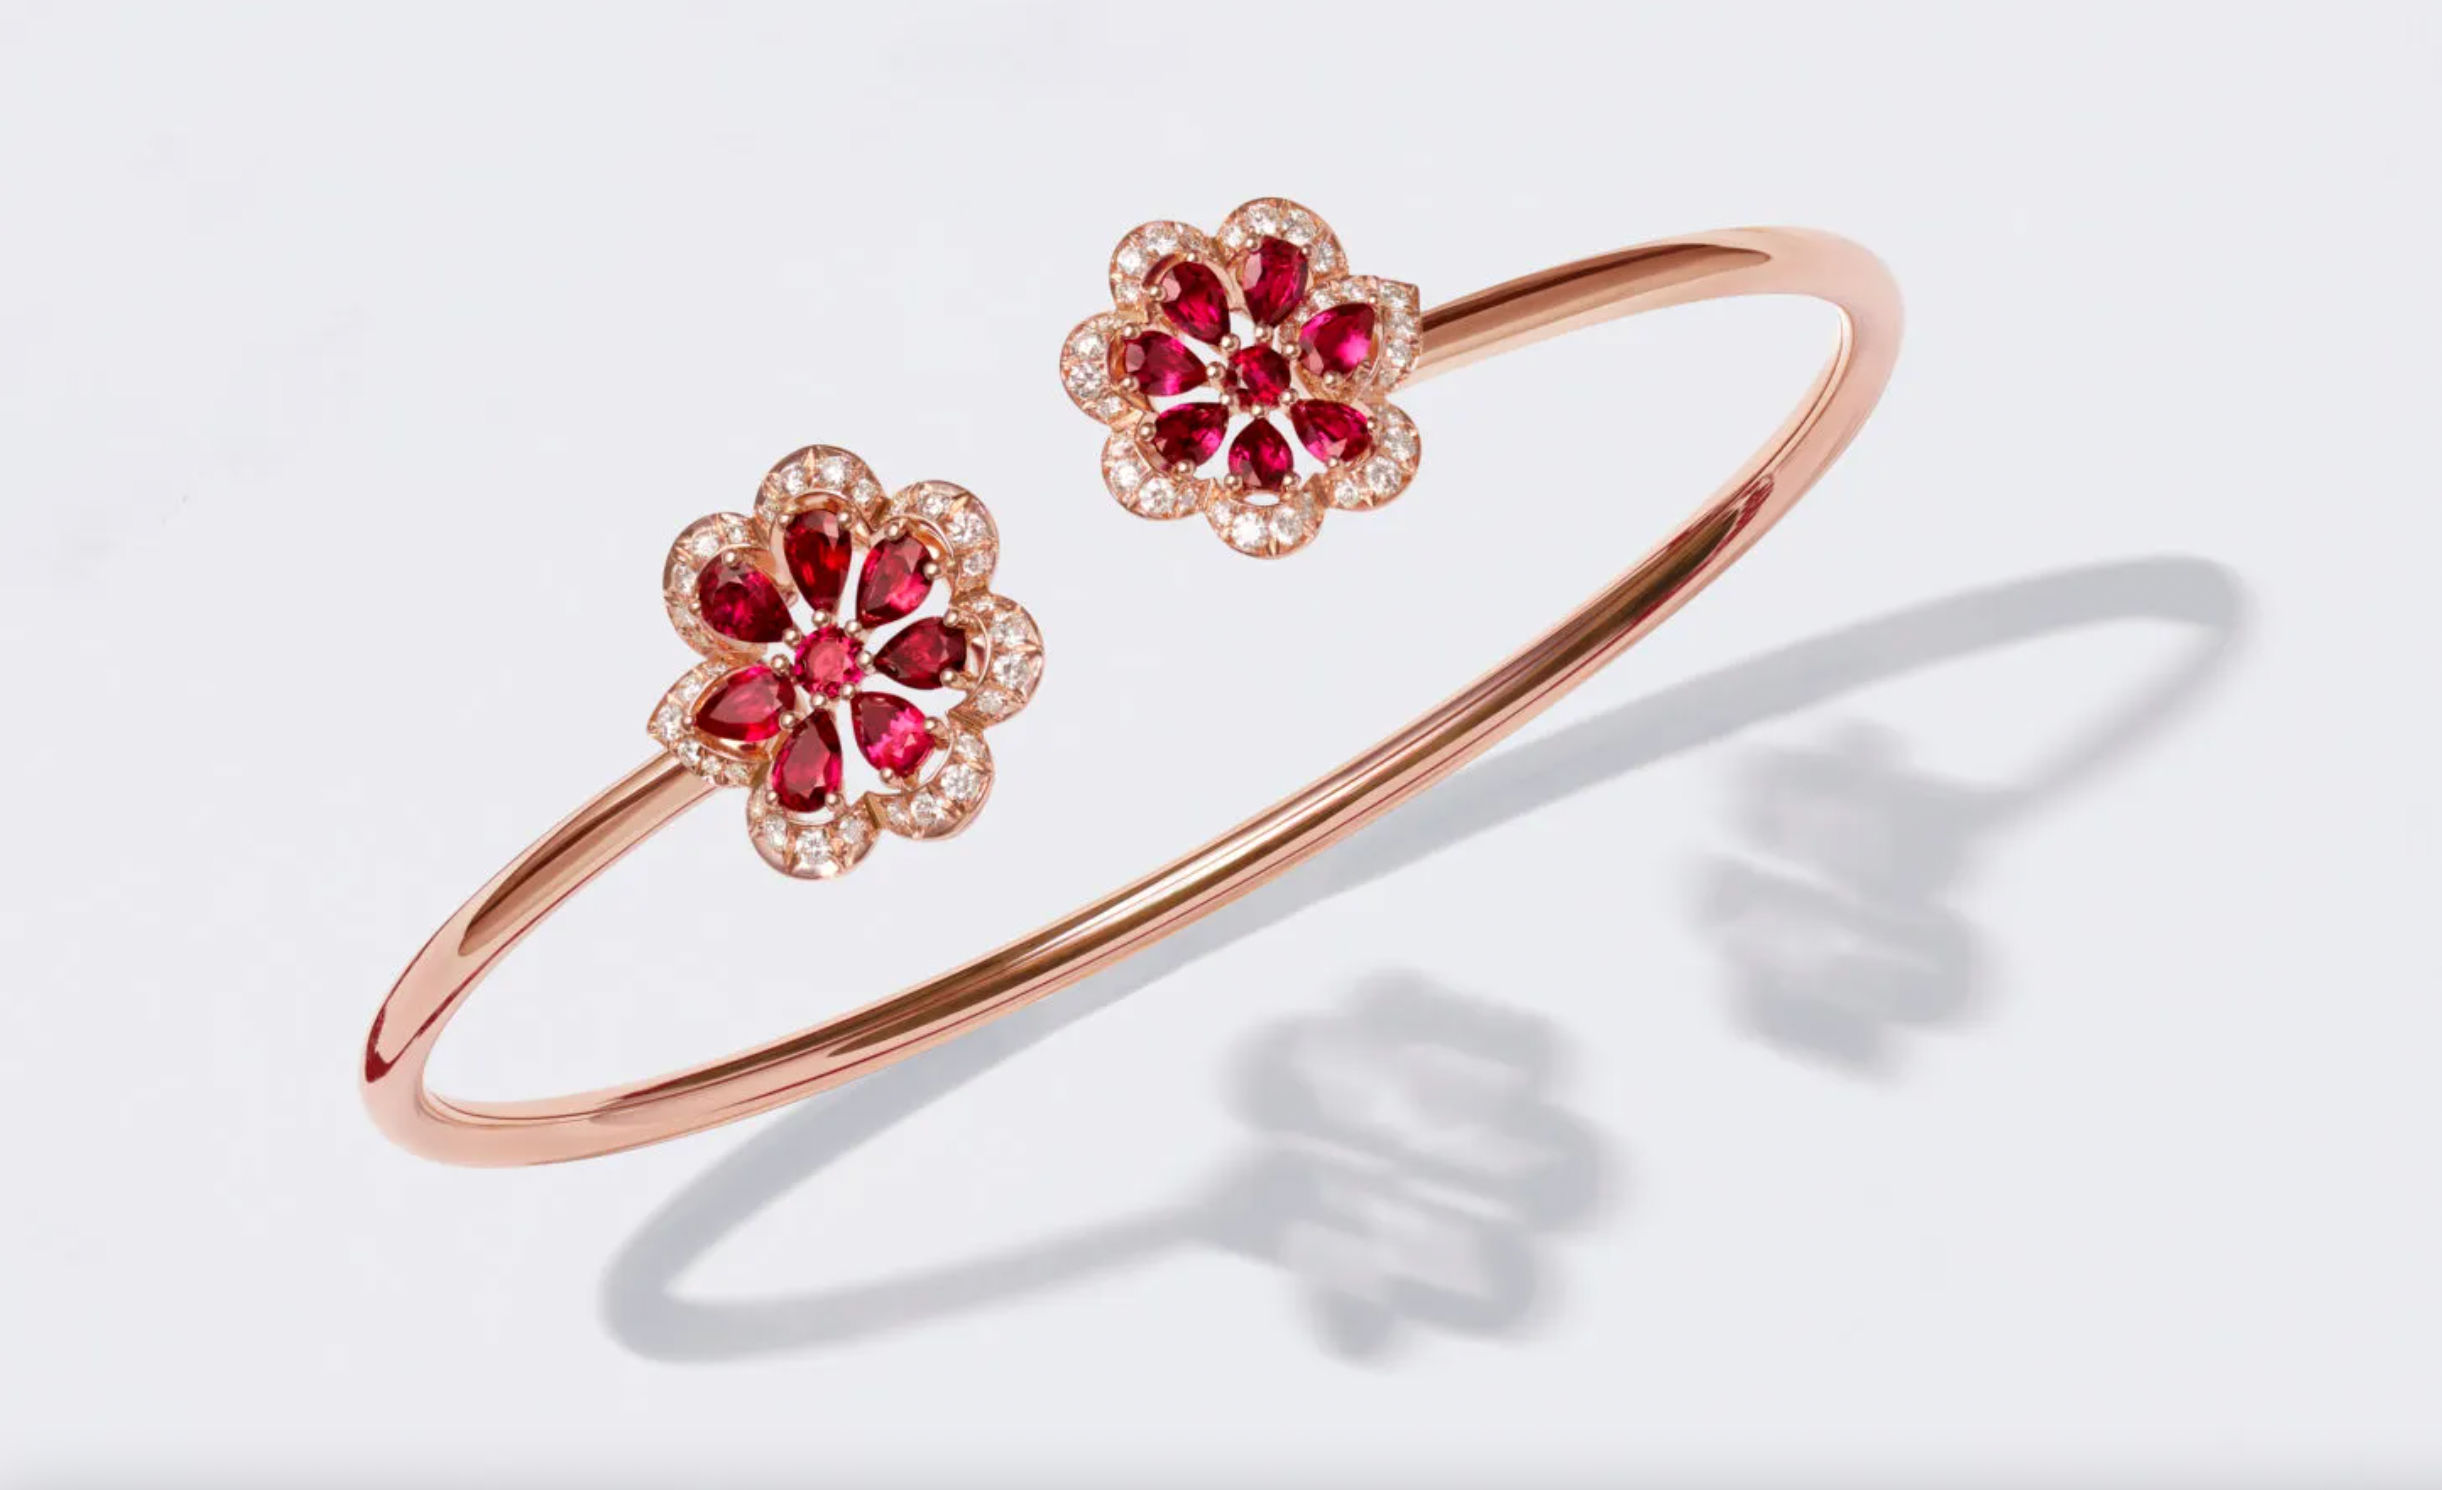 The Jewellery Editor: Chaumet Liens high jewellery collection of new rings